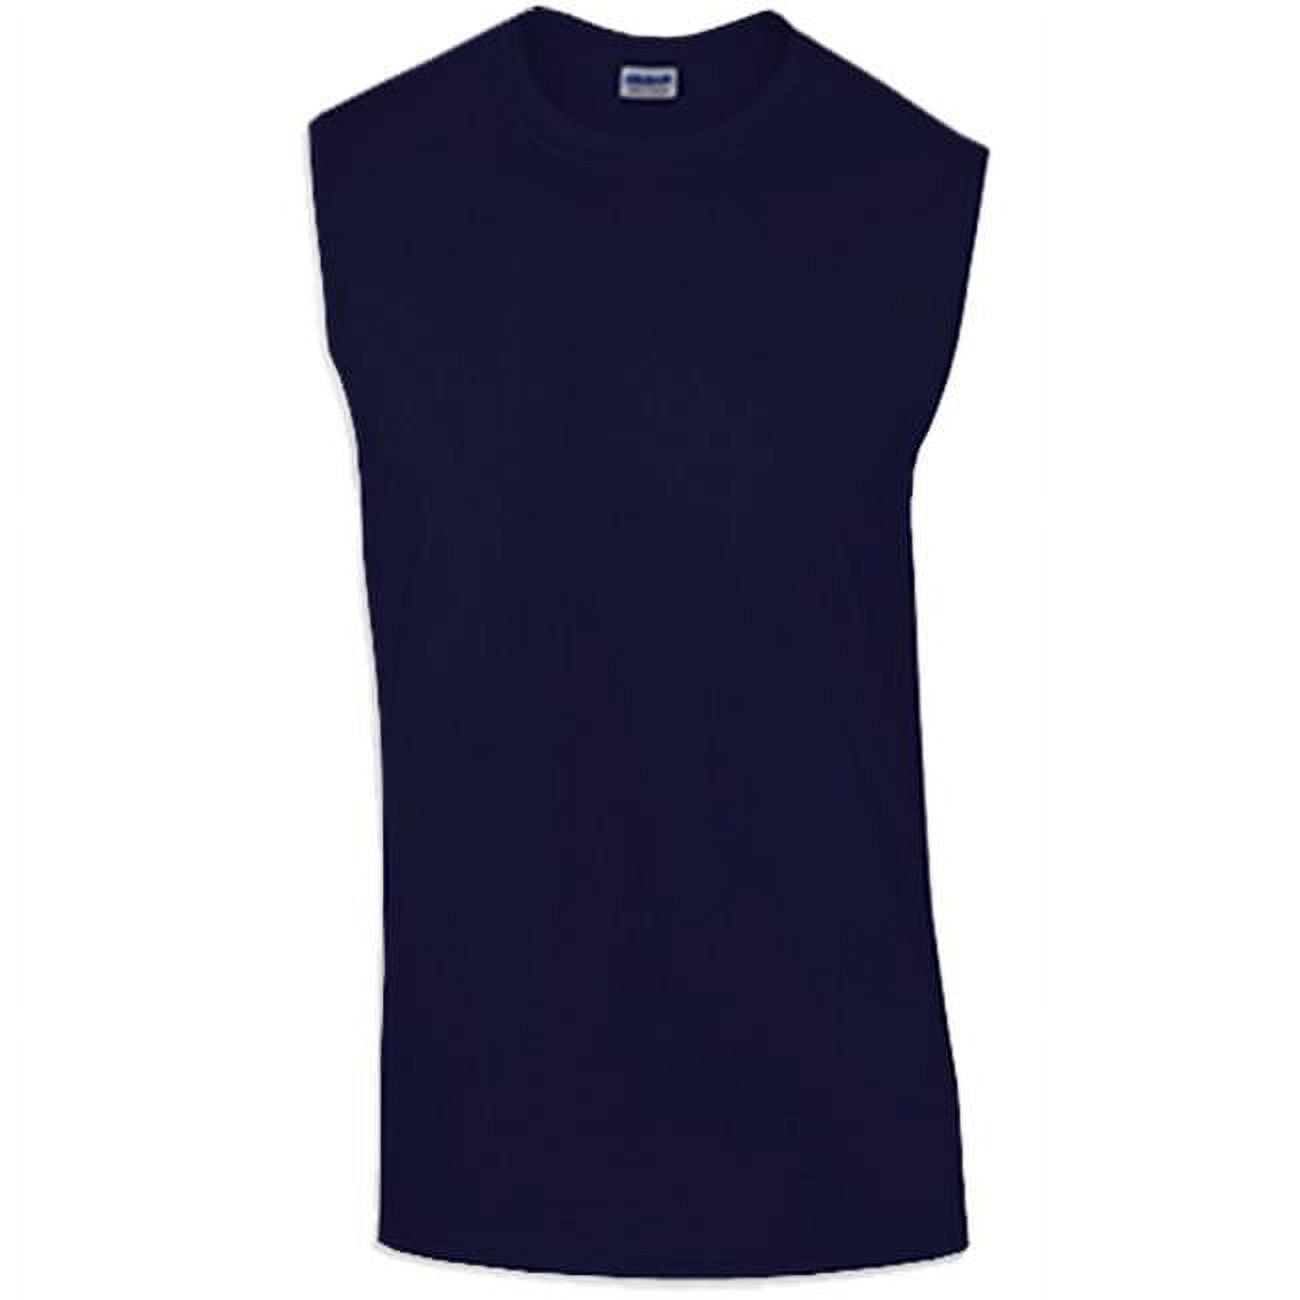 Picture of DDI 2134402 Gildan Tank Top Style 2700 Navy - Size Large Case of 12